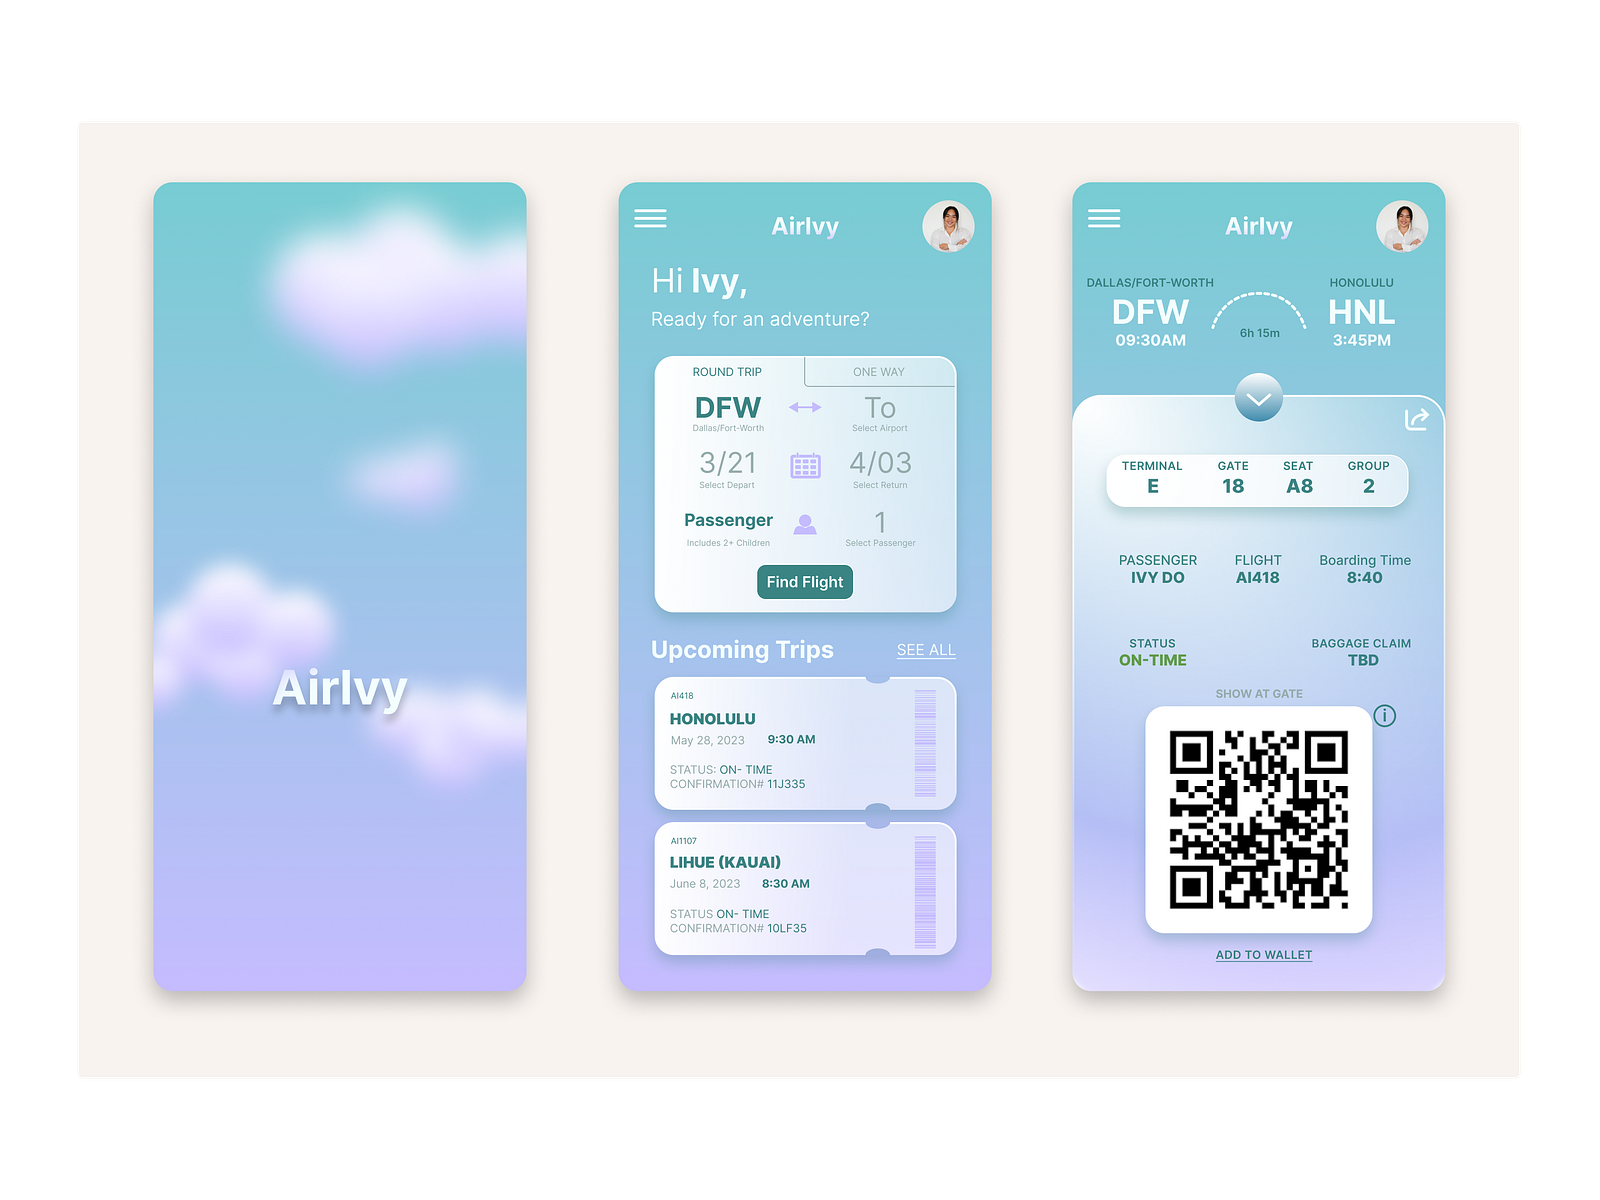 mobile-boarding-pass-by-ivy-do-on-dribbble